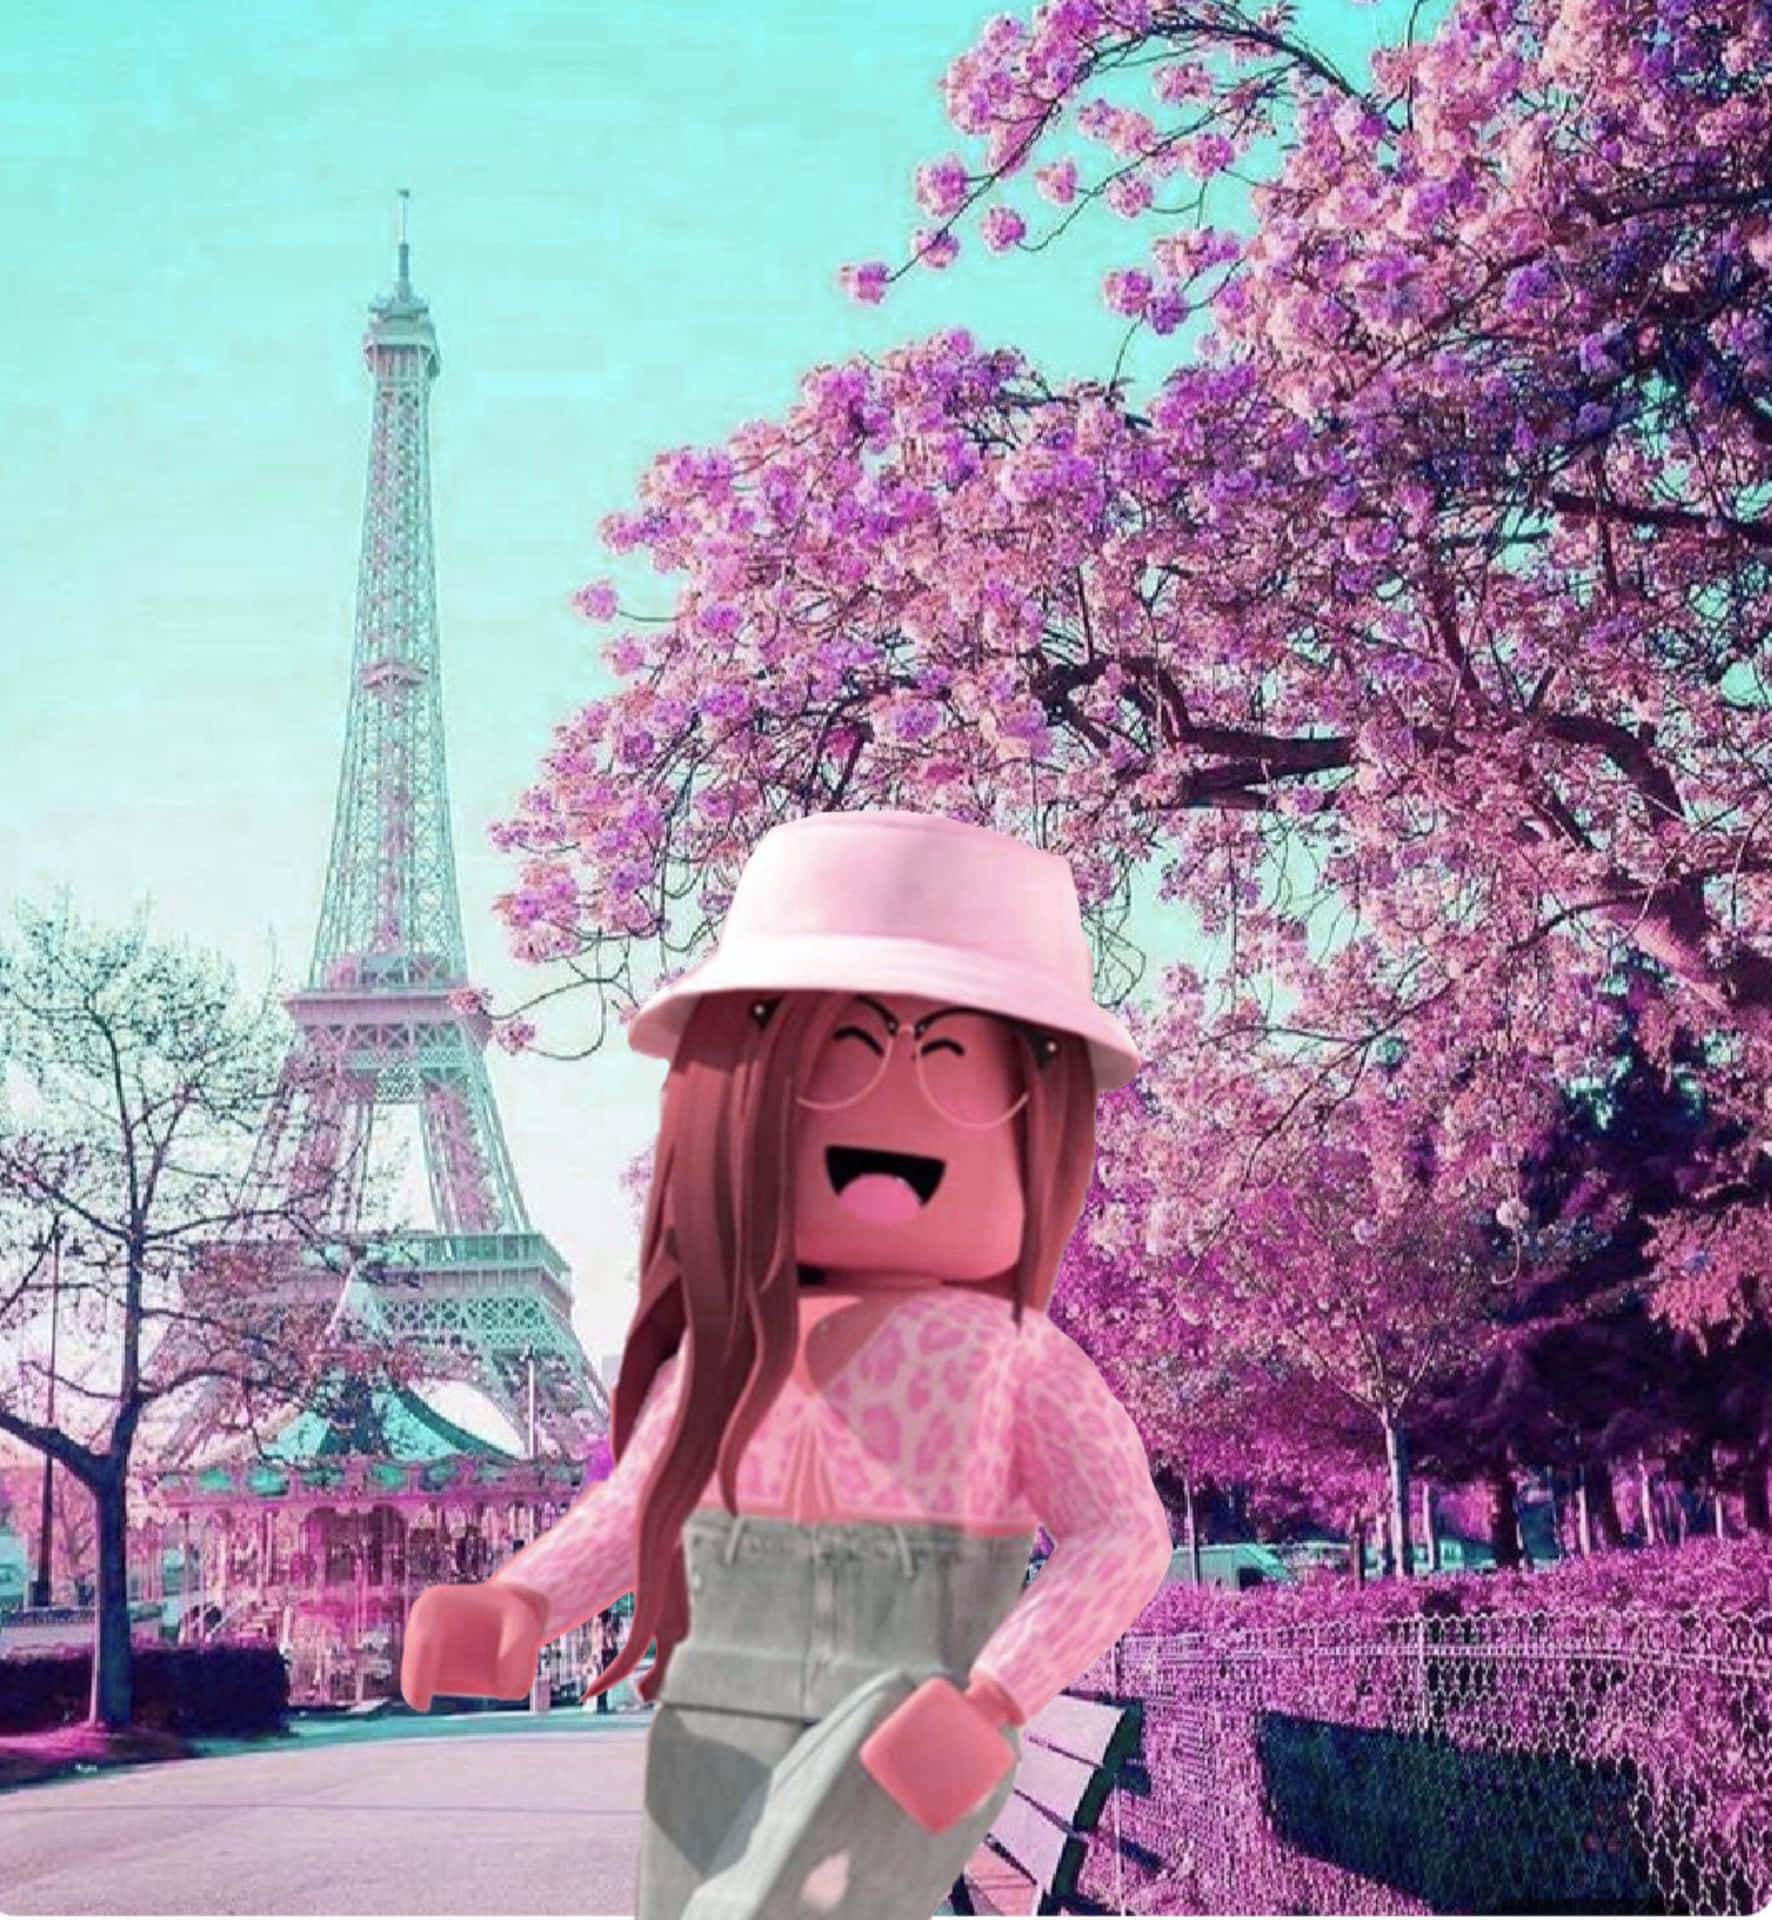 100+] Roblox Pink Wallpapers